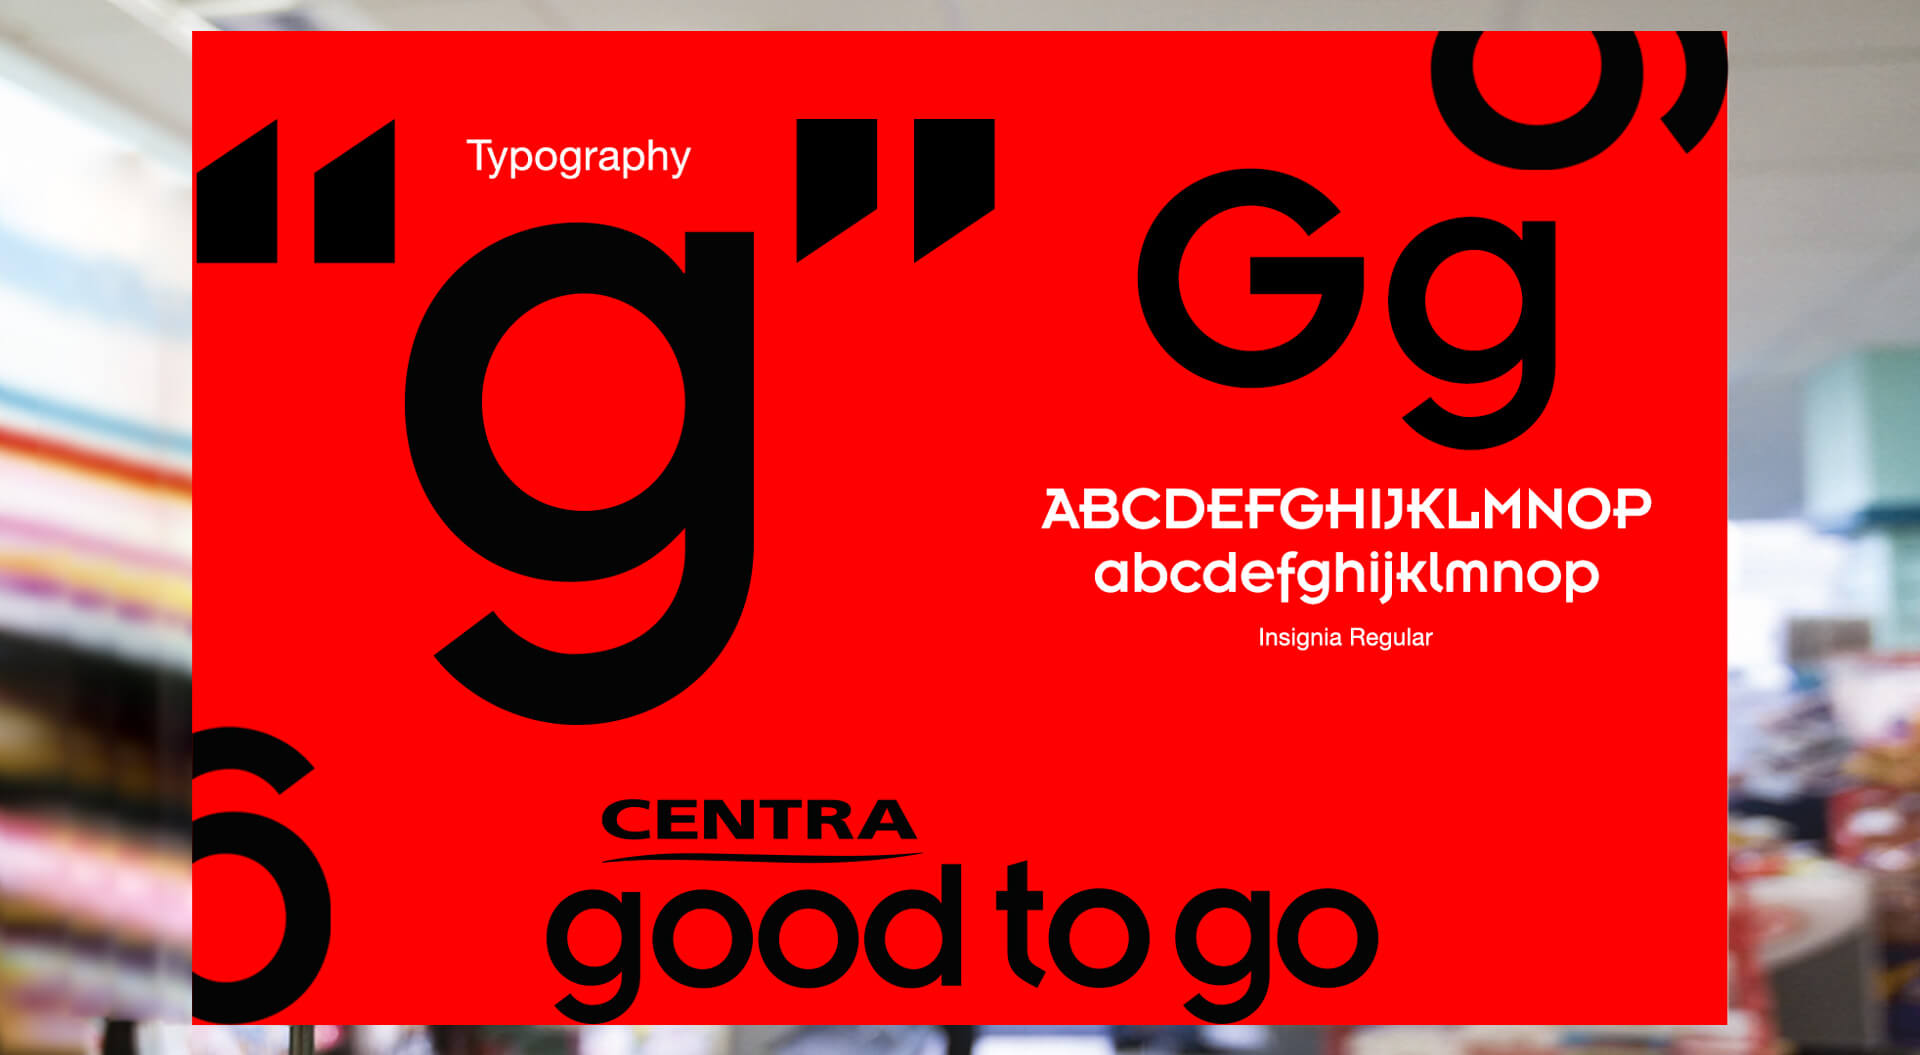 Centra convenience stores good to go typographic styling